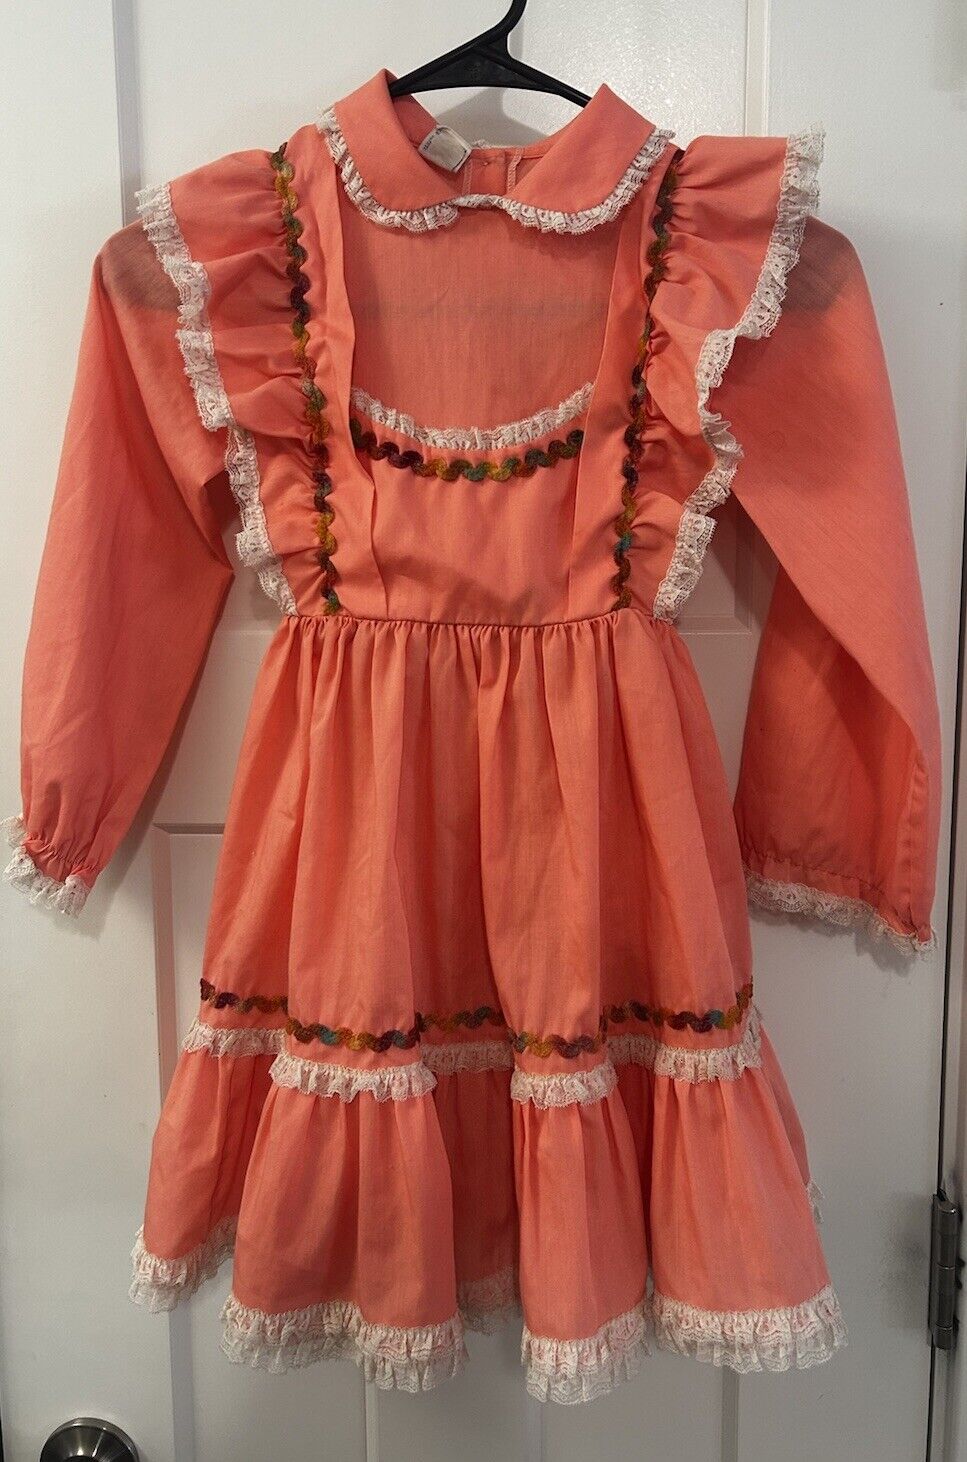 Vintage Mini World Peach Spring Easter Dress Size Girls 6 Ruffles Pinafore Style